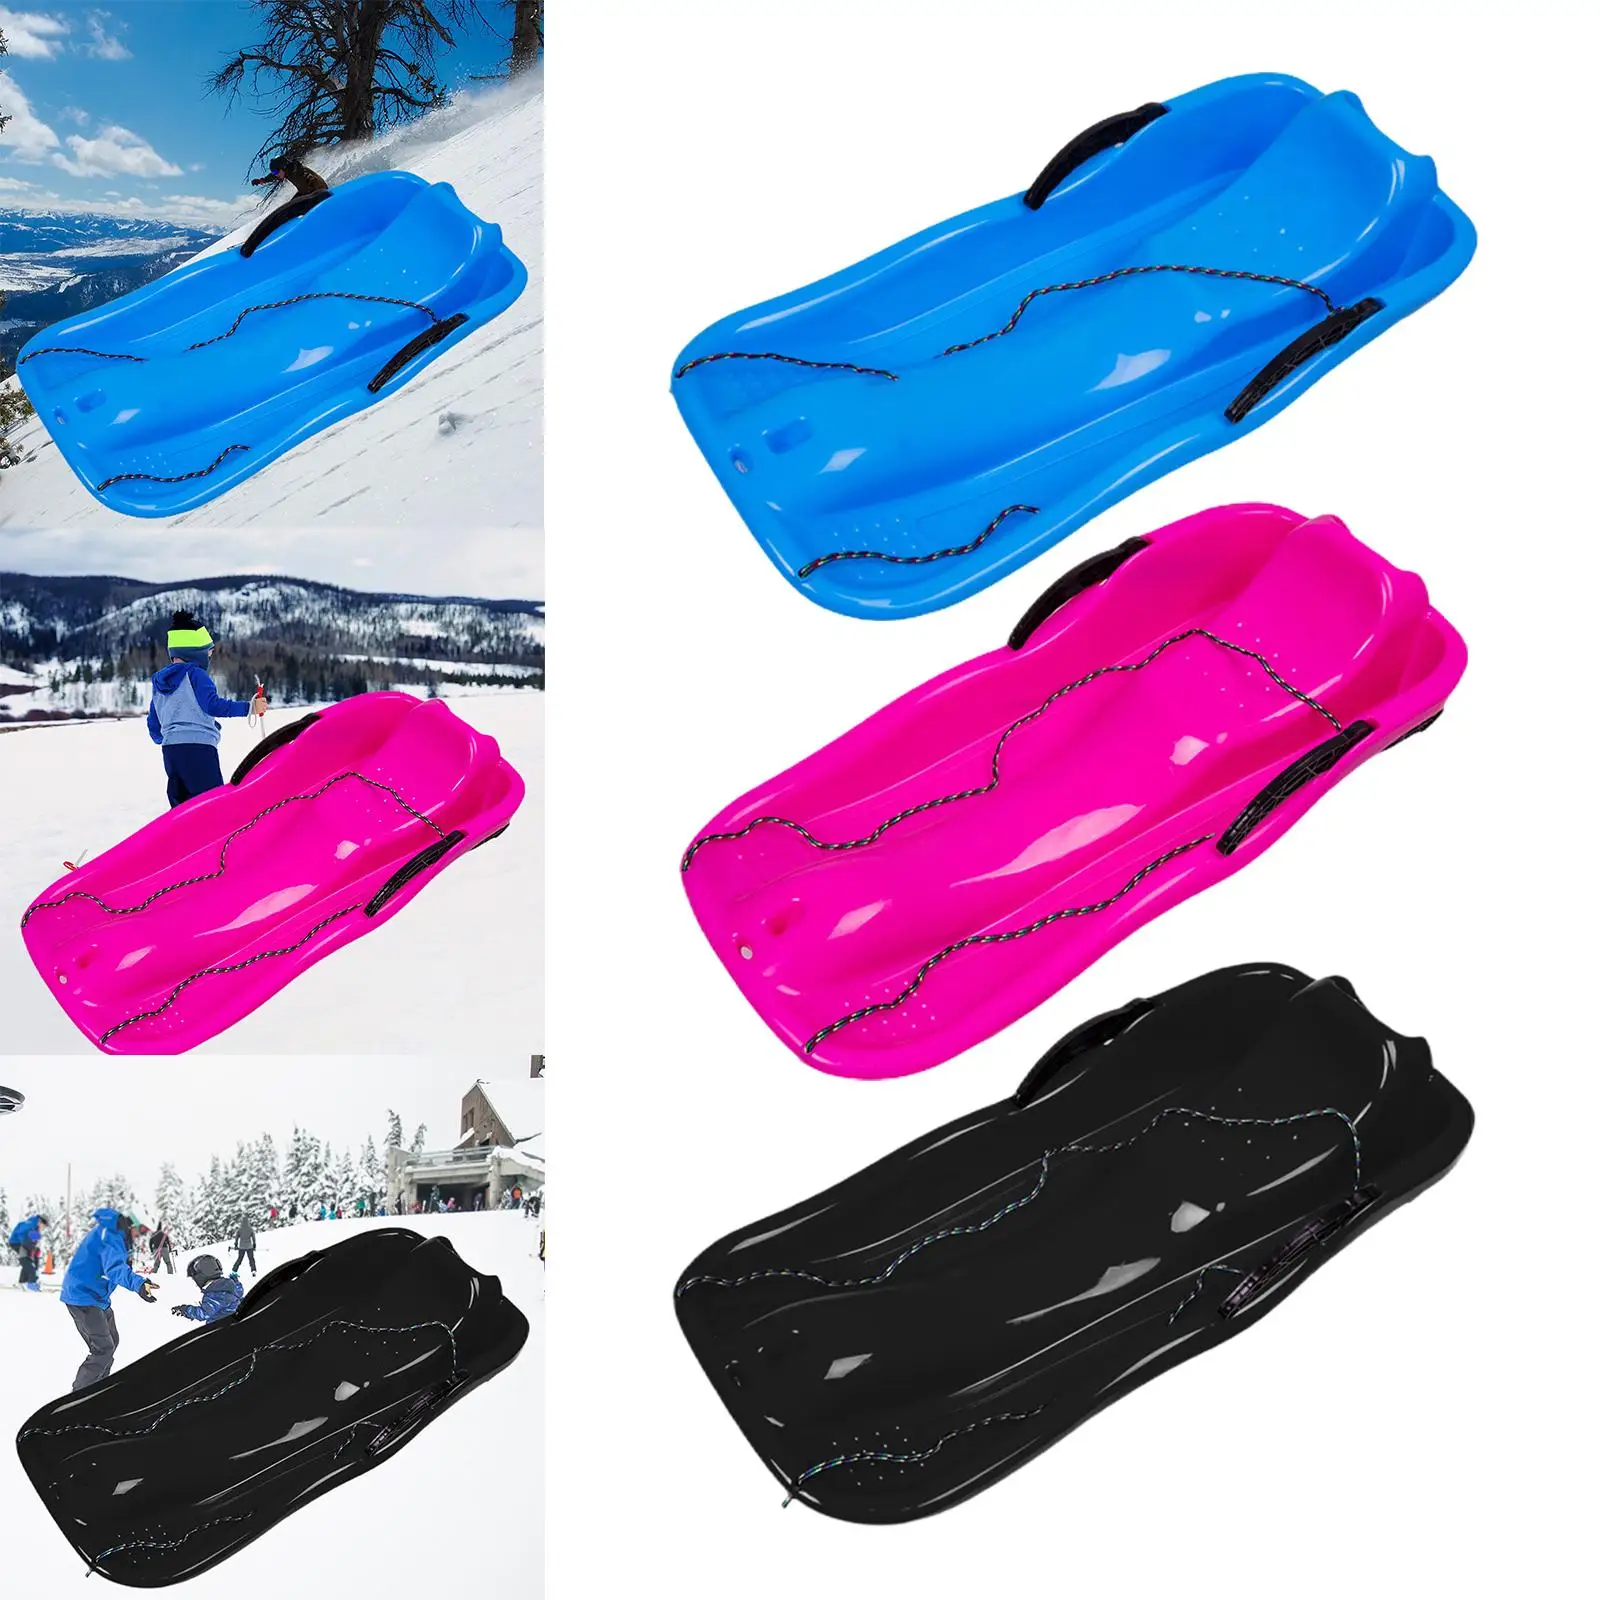 Portable Winter Snow Sled Kids Sledge Sledding Double Human Sleigh with Double Seat with Pull Rope Toboggan for Skiing Lawn Yard